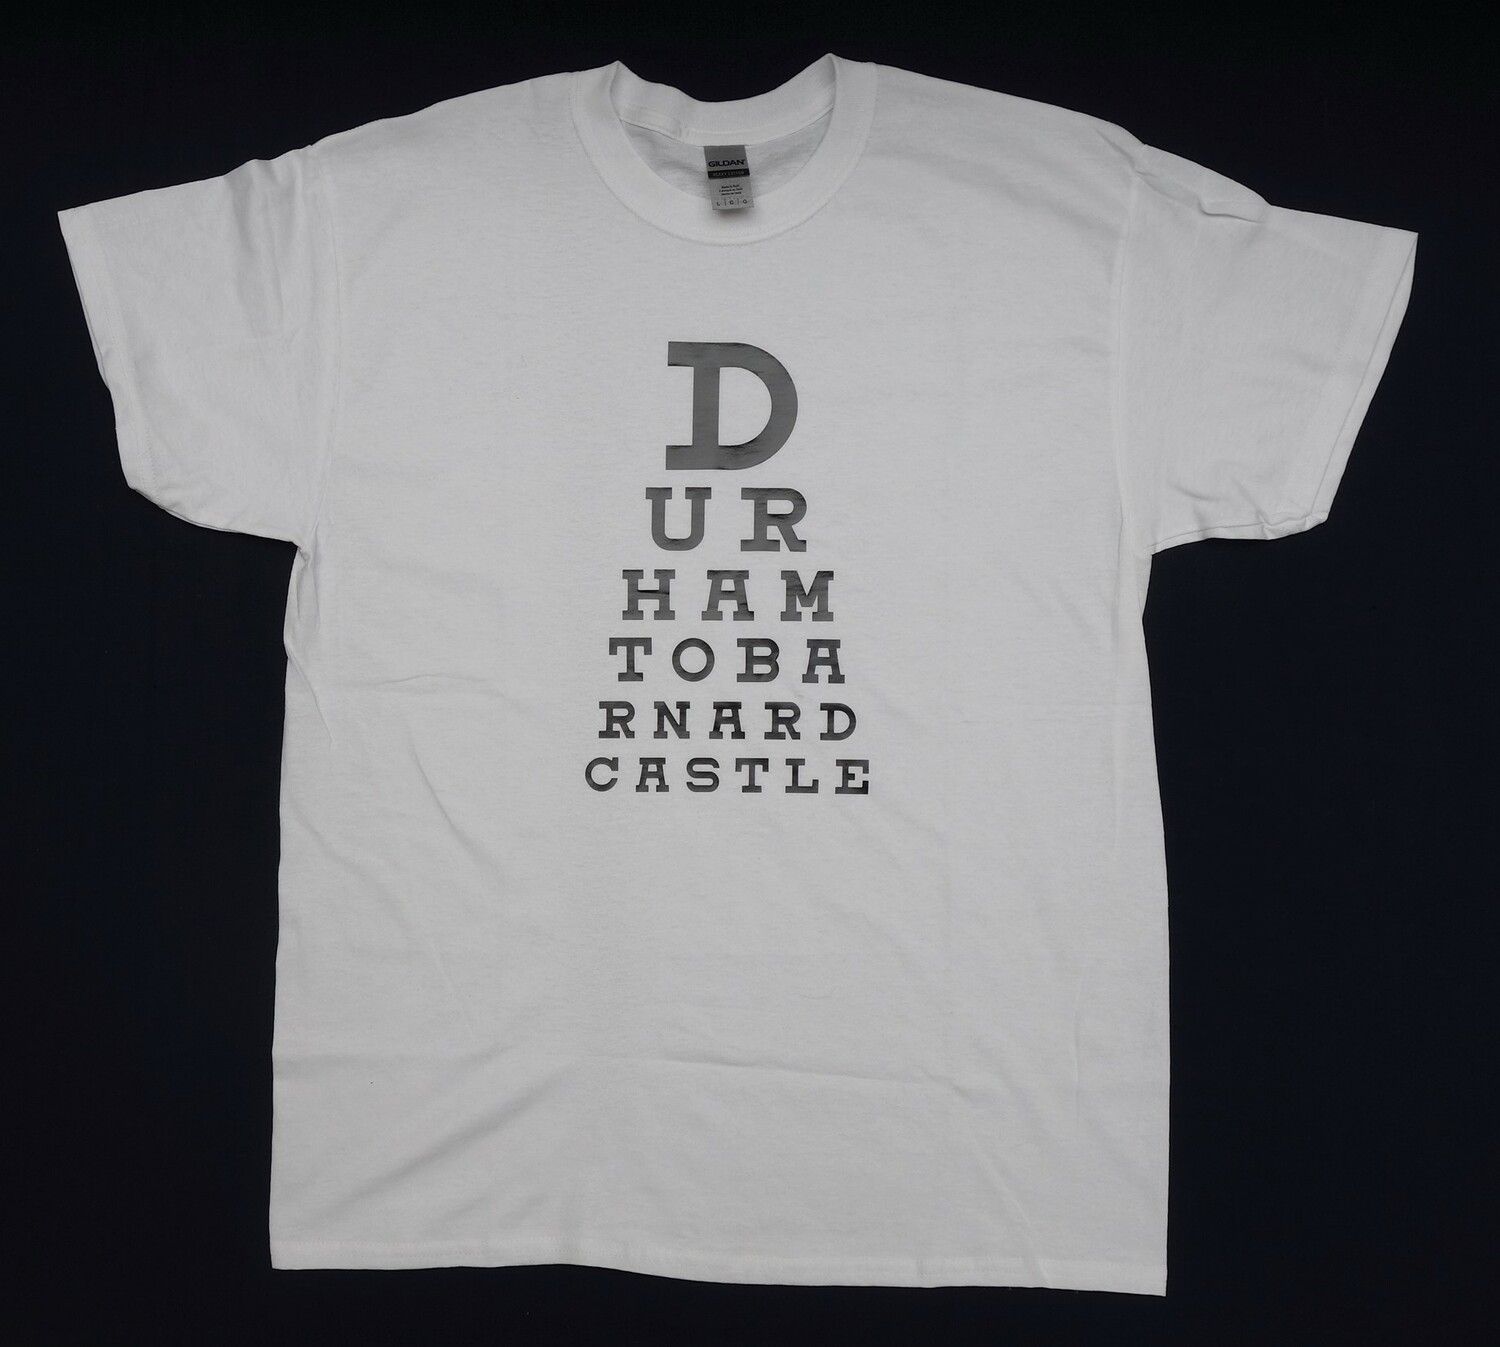 T-shirt referring to the legendary eye-sight test of the British official, Dominic Cummings, to Barnard Castle (TRC 2020.3015).